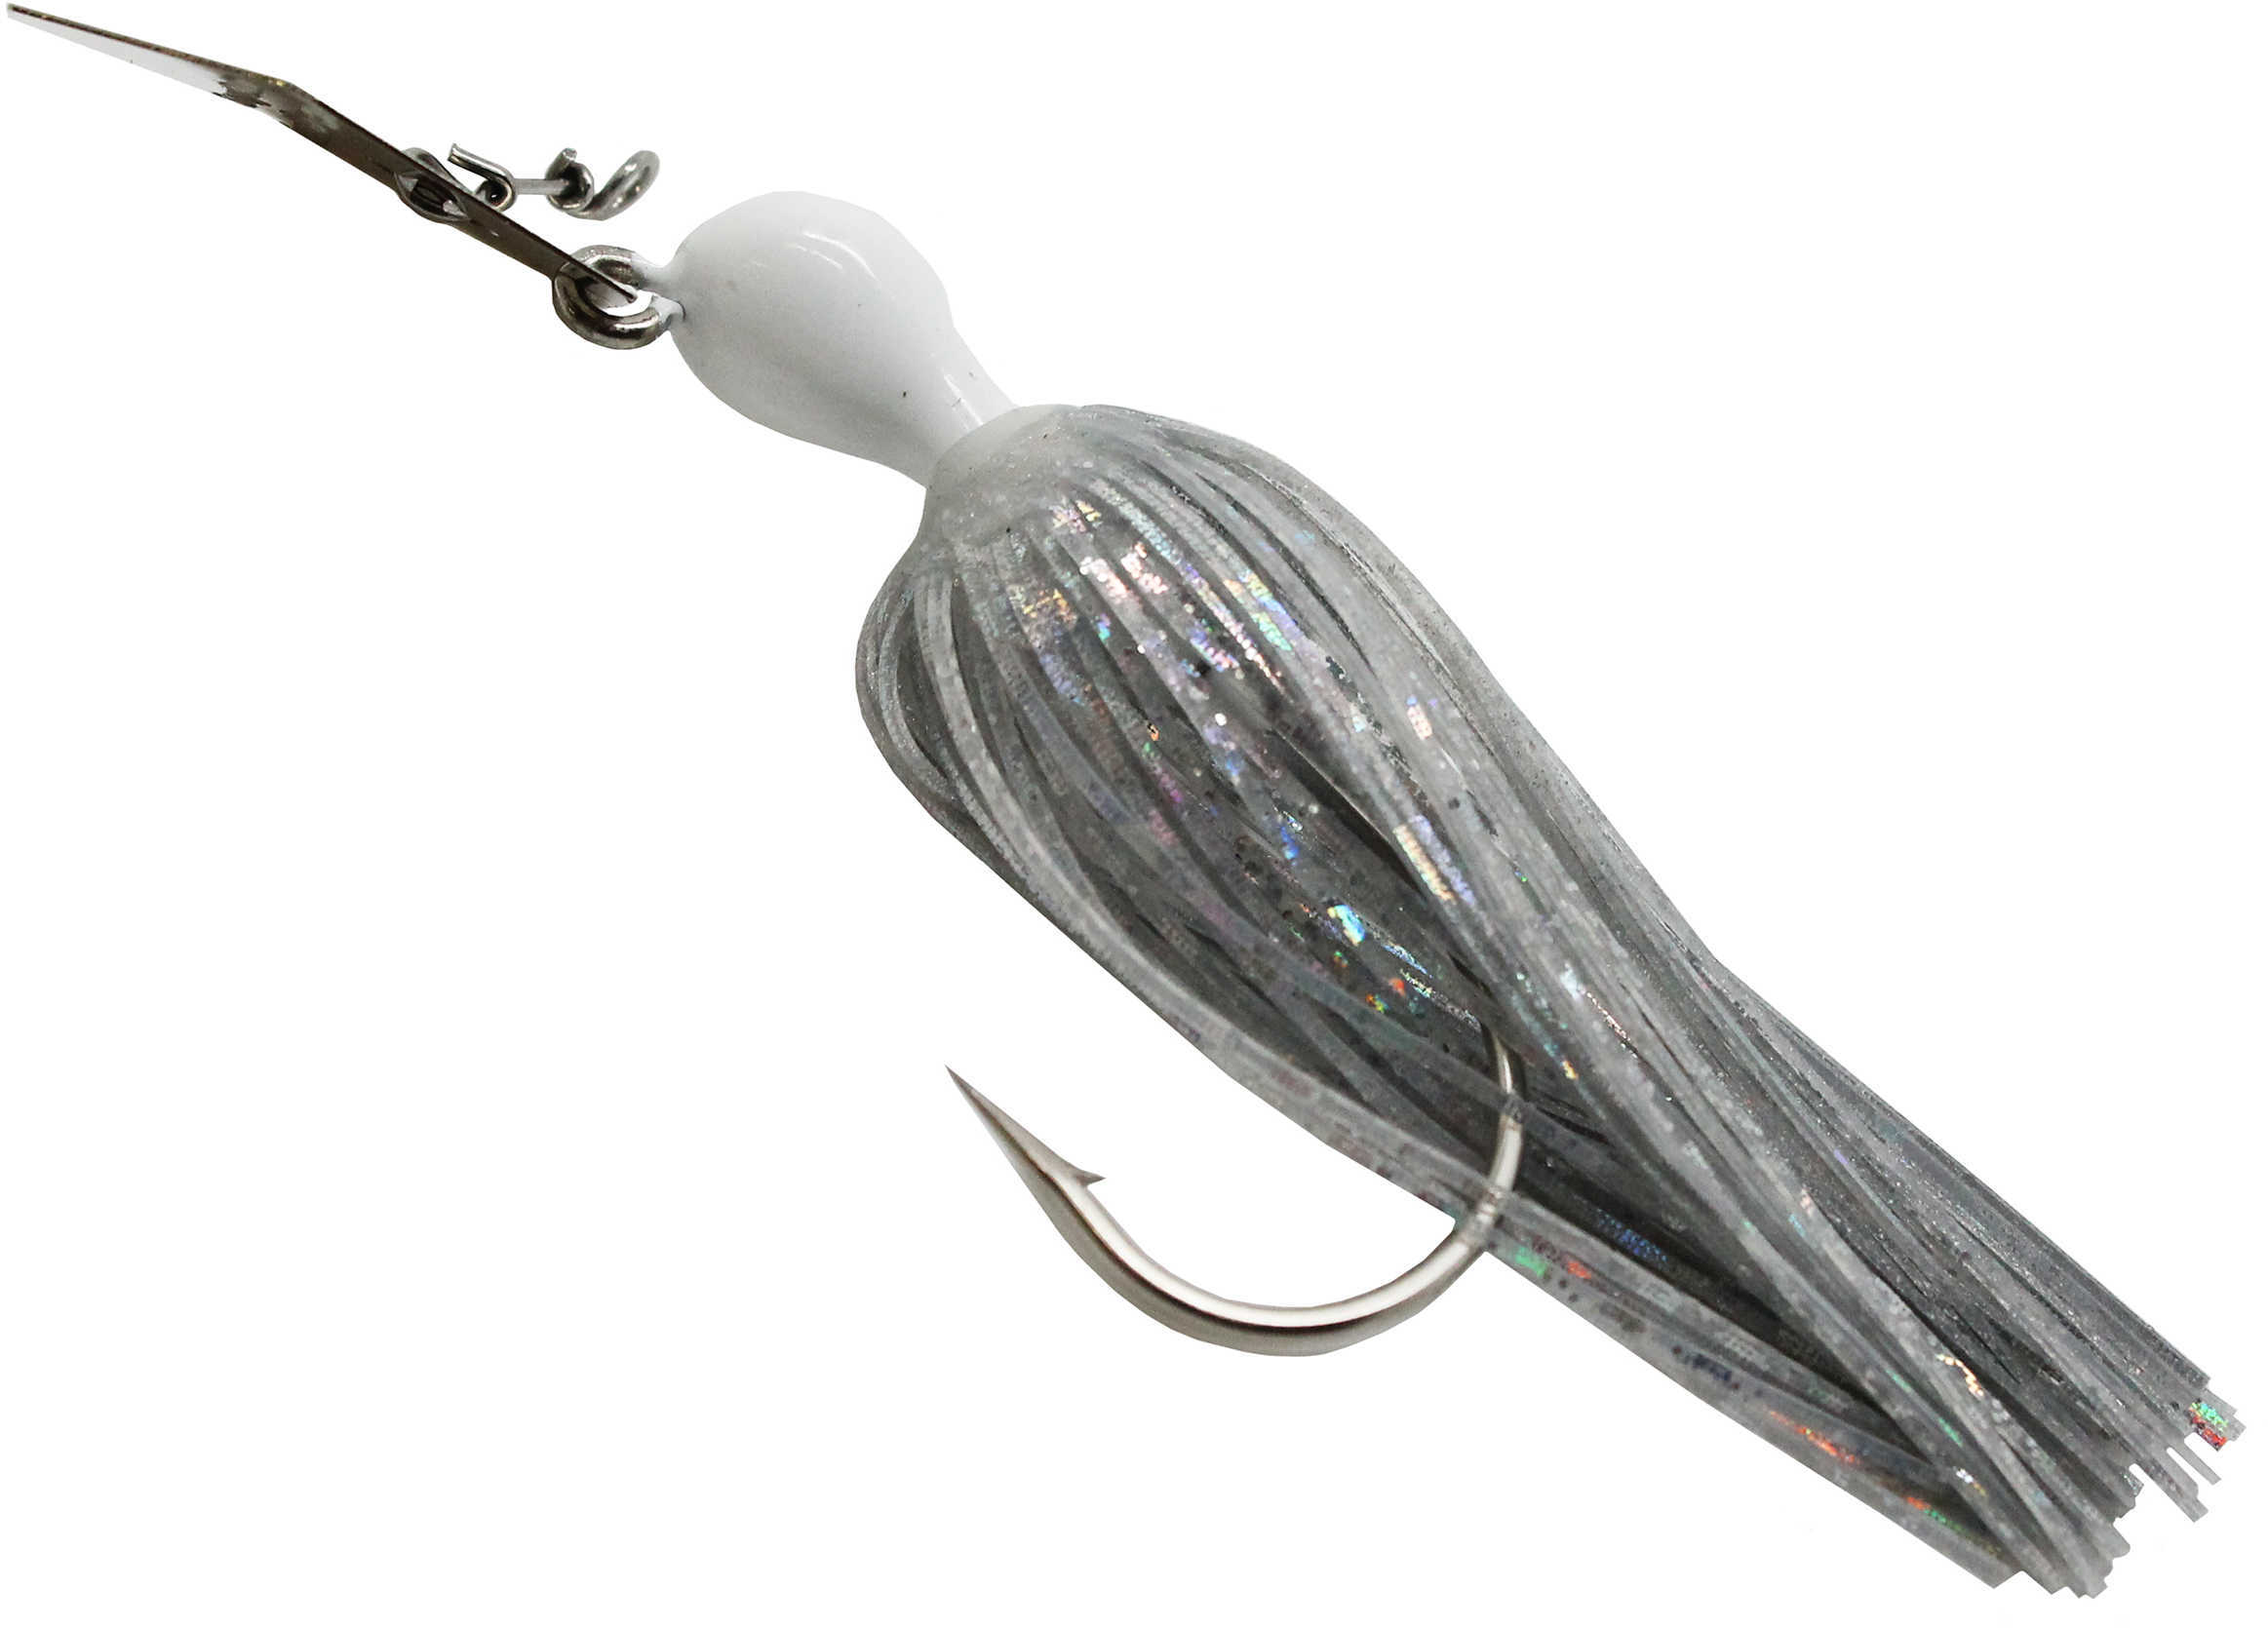 Z-man Fishing Products Chatter Bait 1/2 Ounce Shad Blue Glimmer Lure, Md: CB12-14